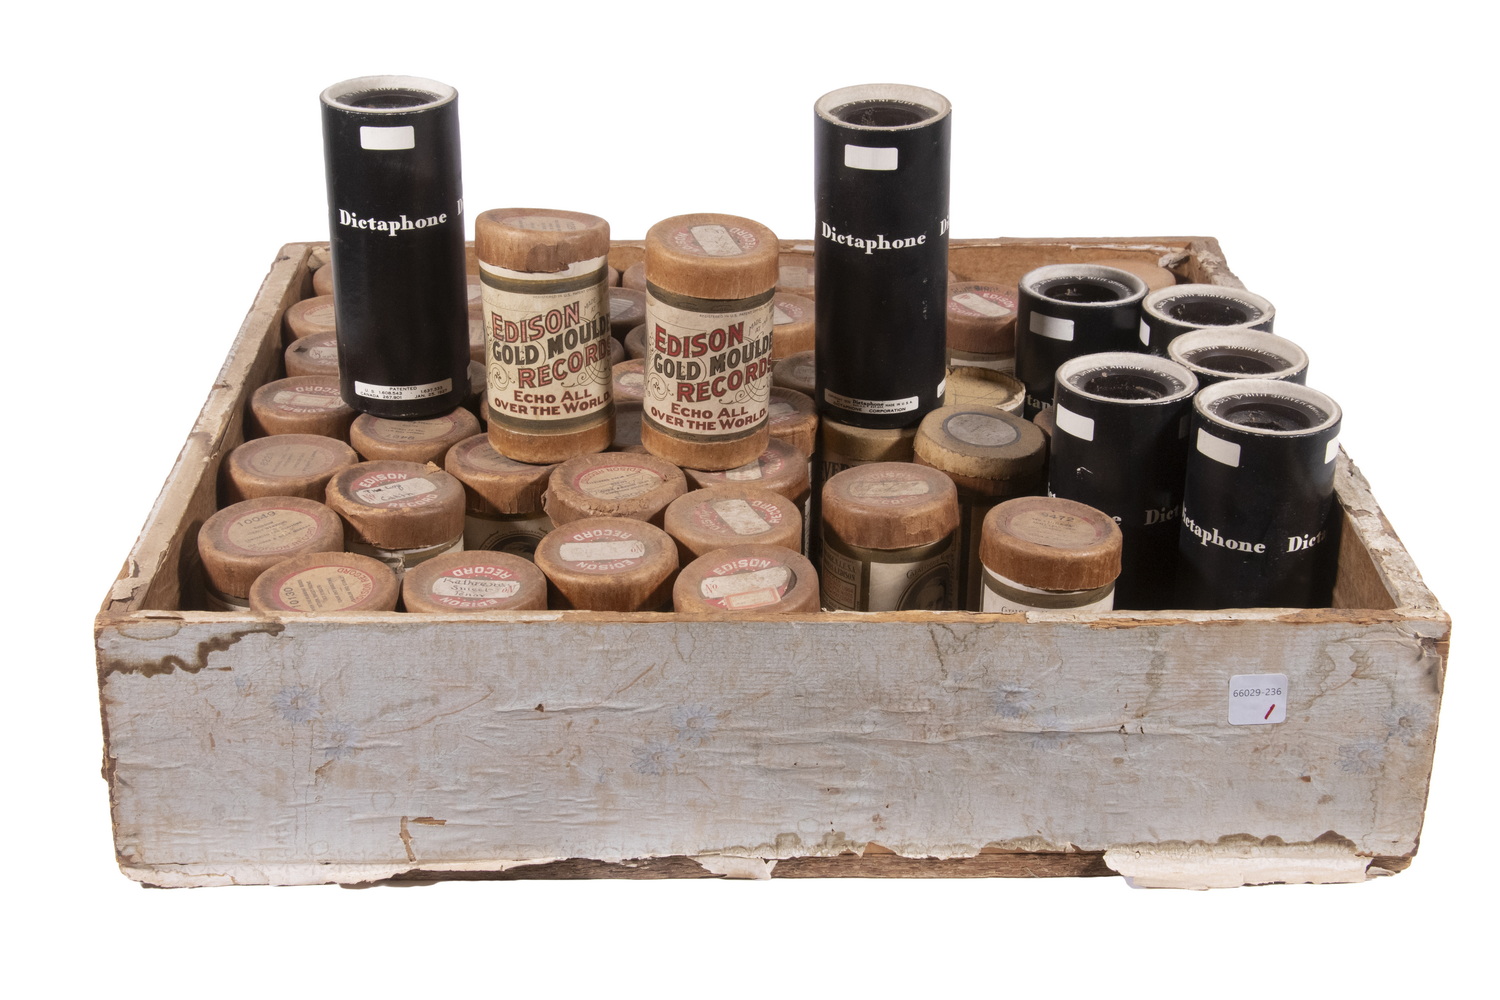 GROUP OF EDISON RECORDING CYLINDERS 3b6568